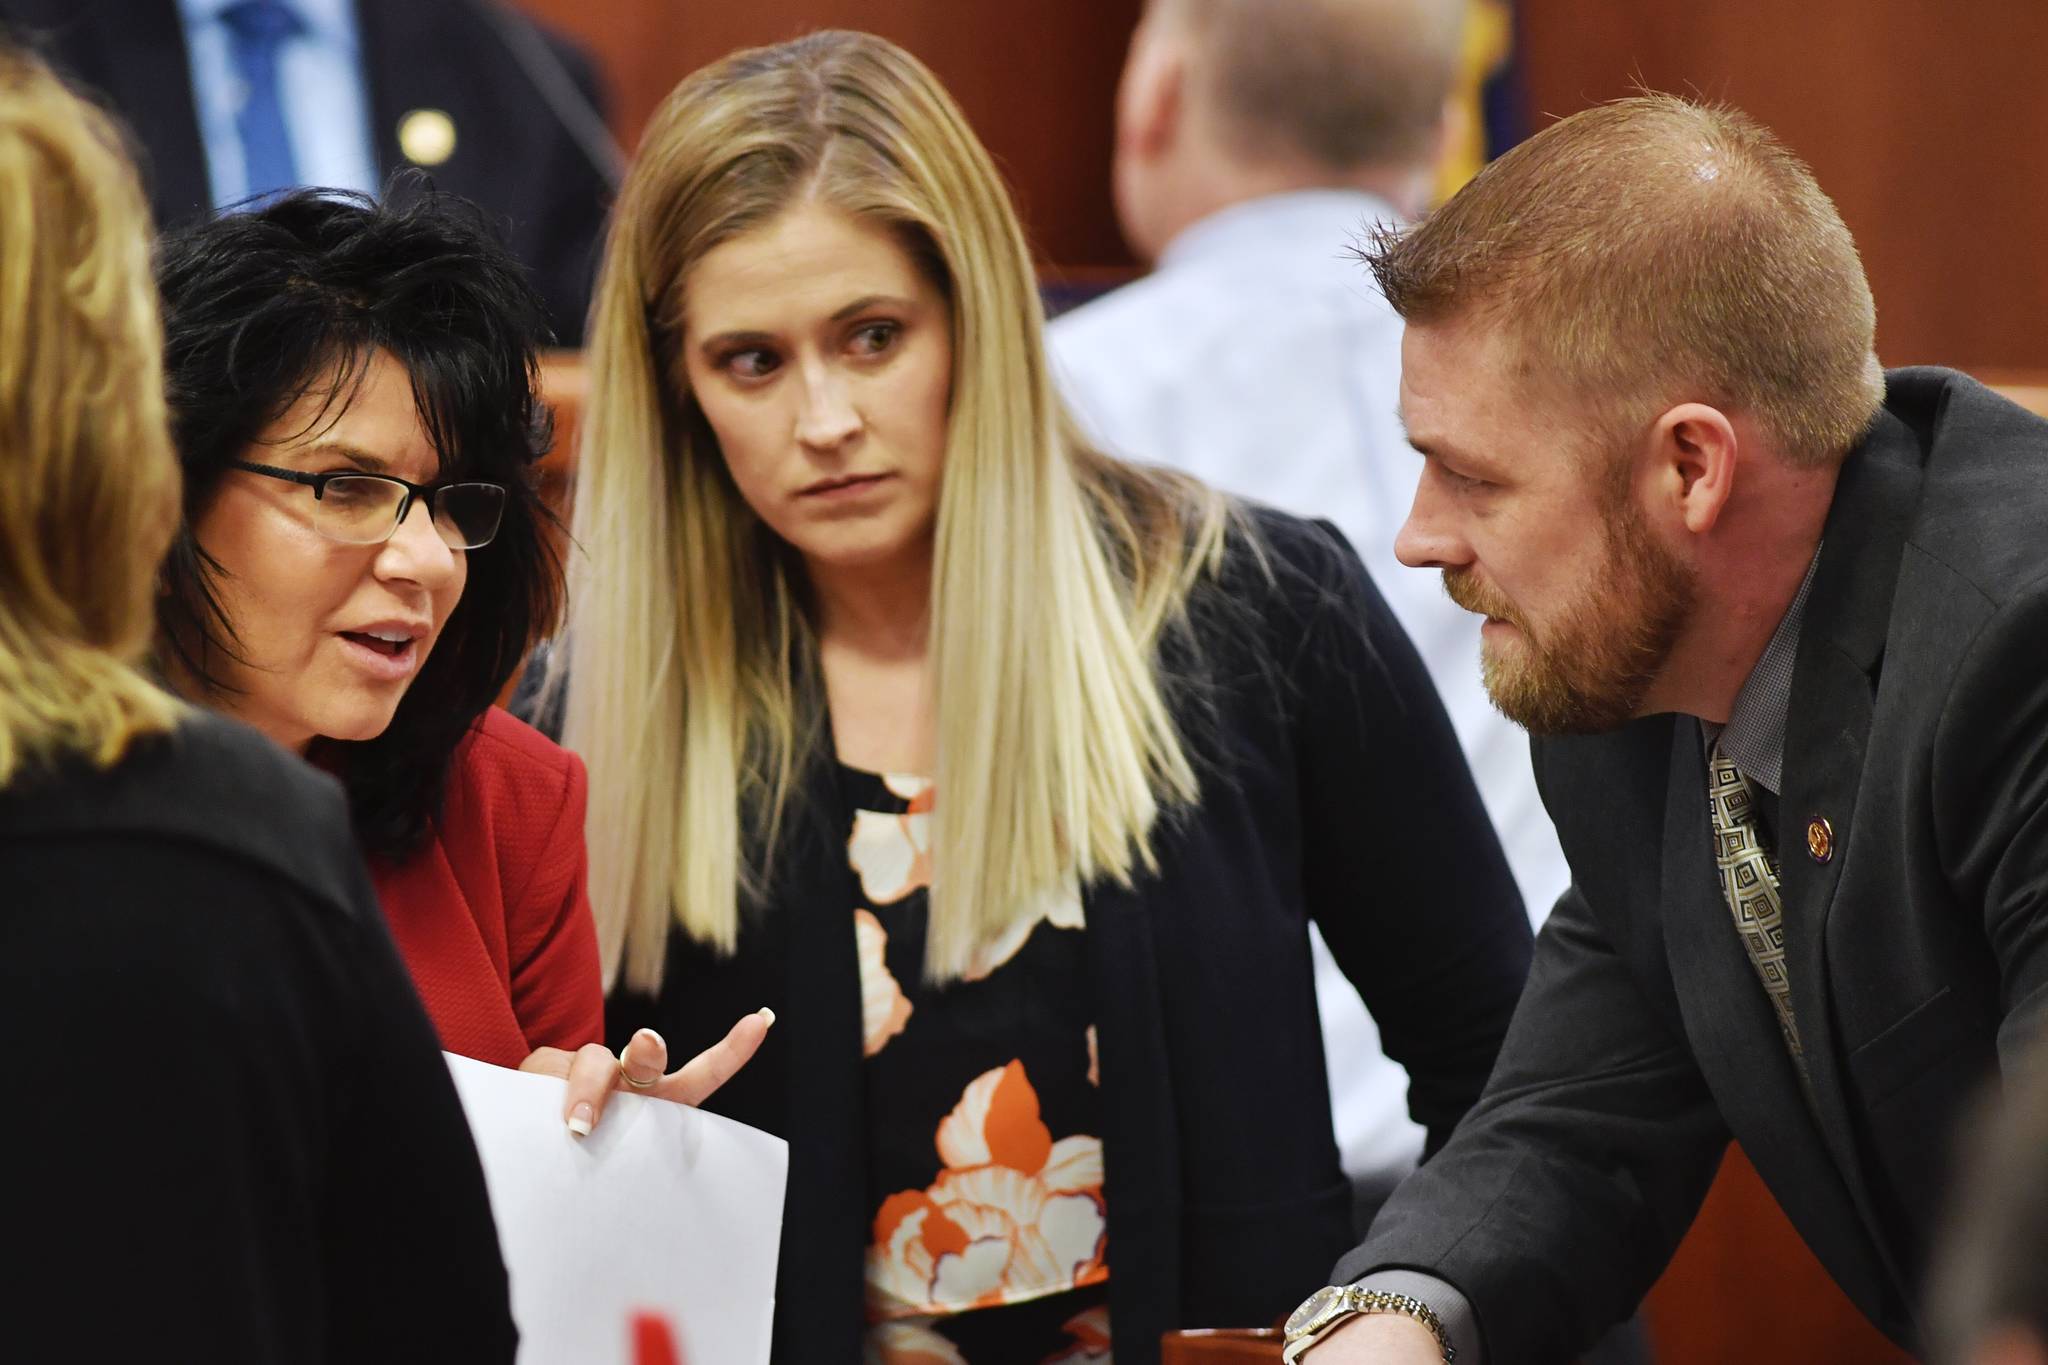 Rep. Cathy Tilton, R-Wasilla, left, speaks with Rep. Sara Rasmussen, R-Anchorage, and Rep. Josh Revak, R-Anchorage, on the House floor as amendments to the budget are proposed on Tuesday, April 9, 2019 in Juneau, Alaska. (Michael Penn | Juneau Empire)